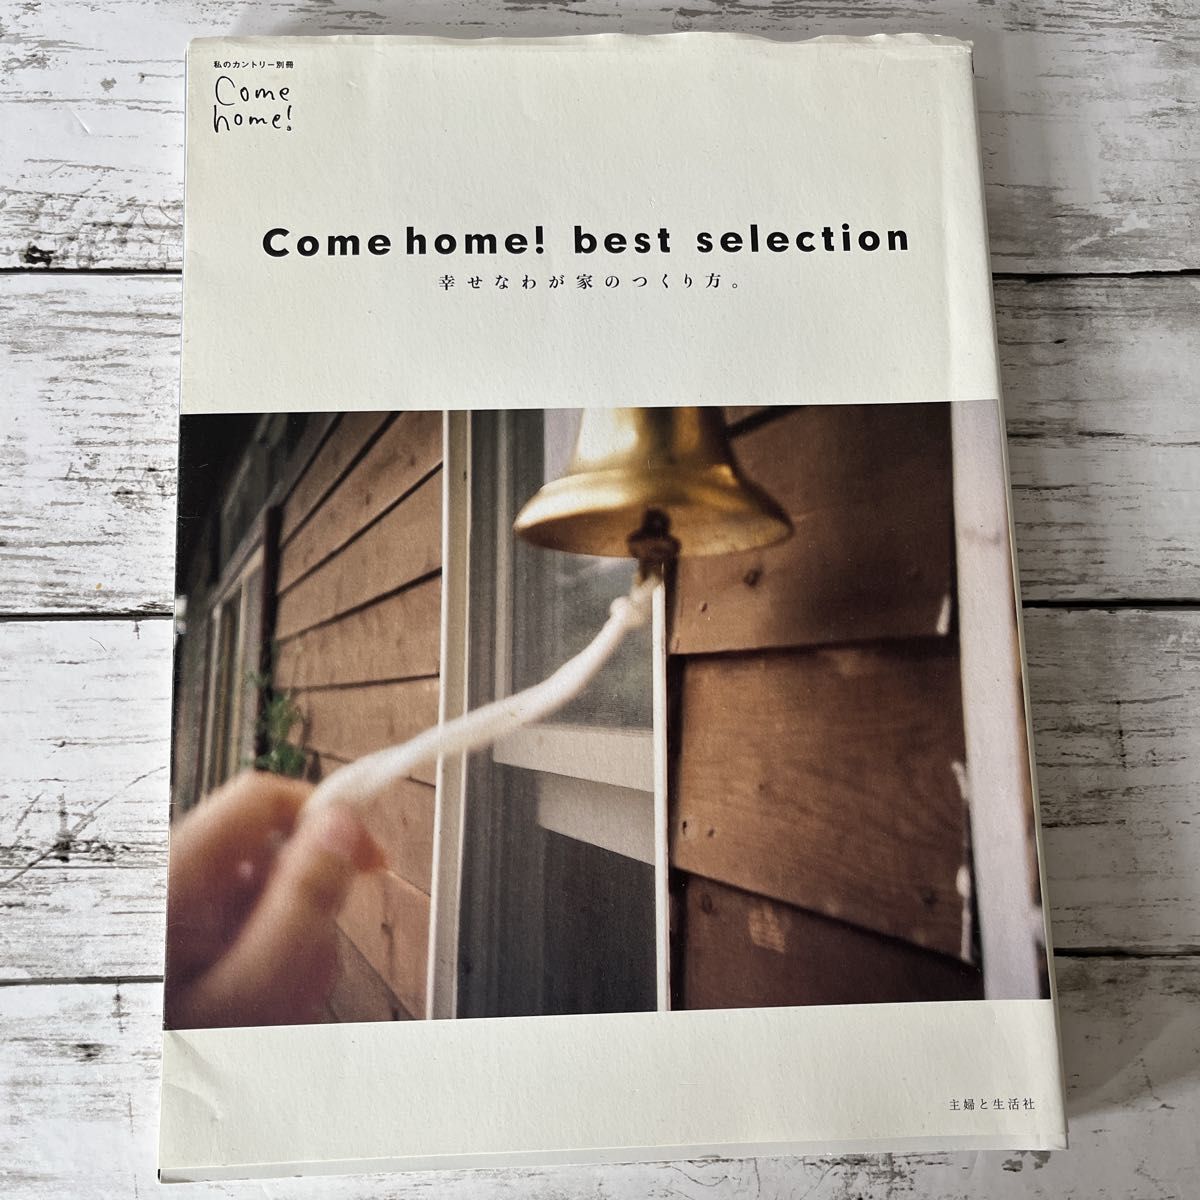 Come home! best selection : 幸せなわが家のつくり方。